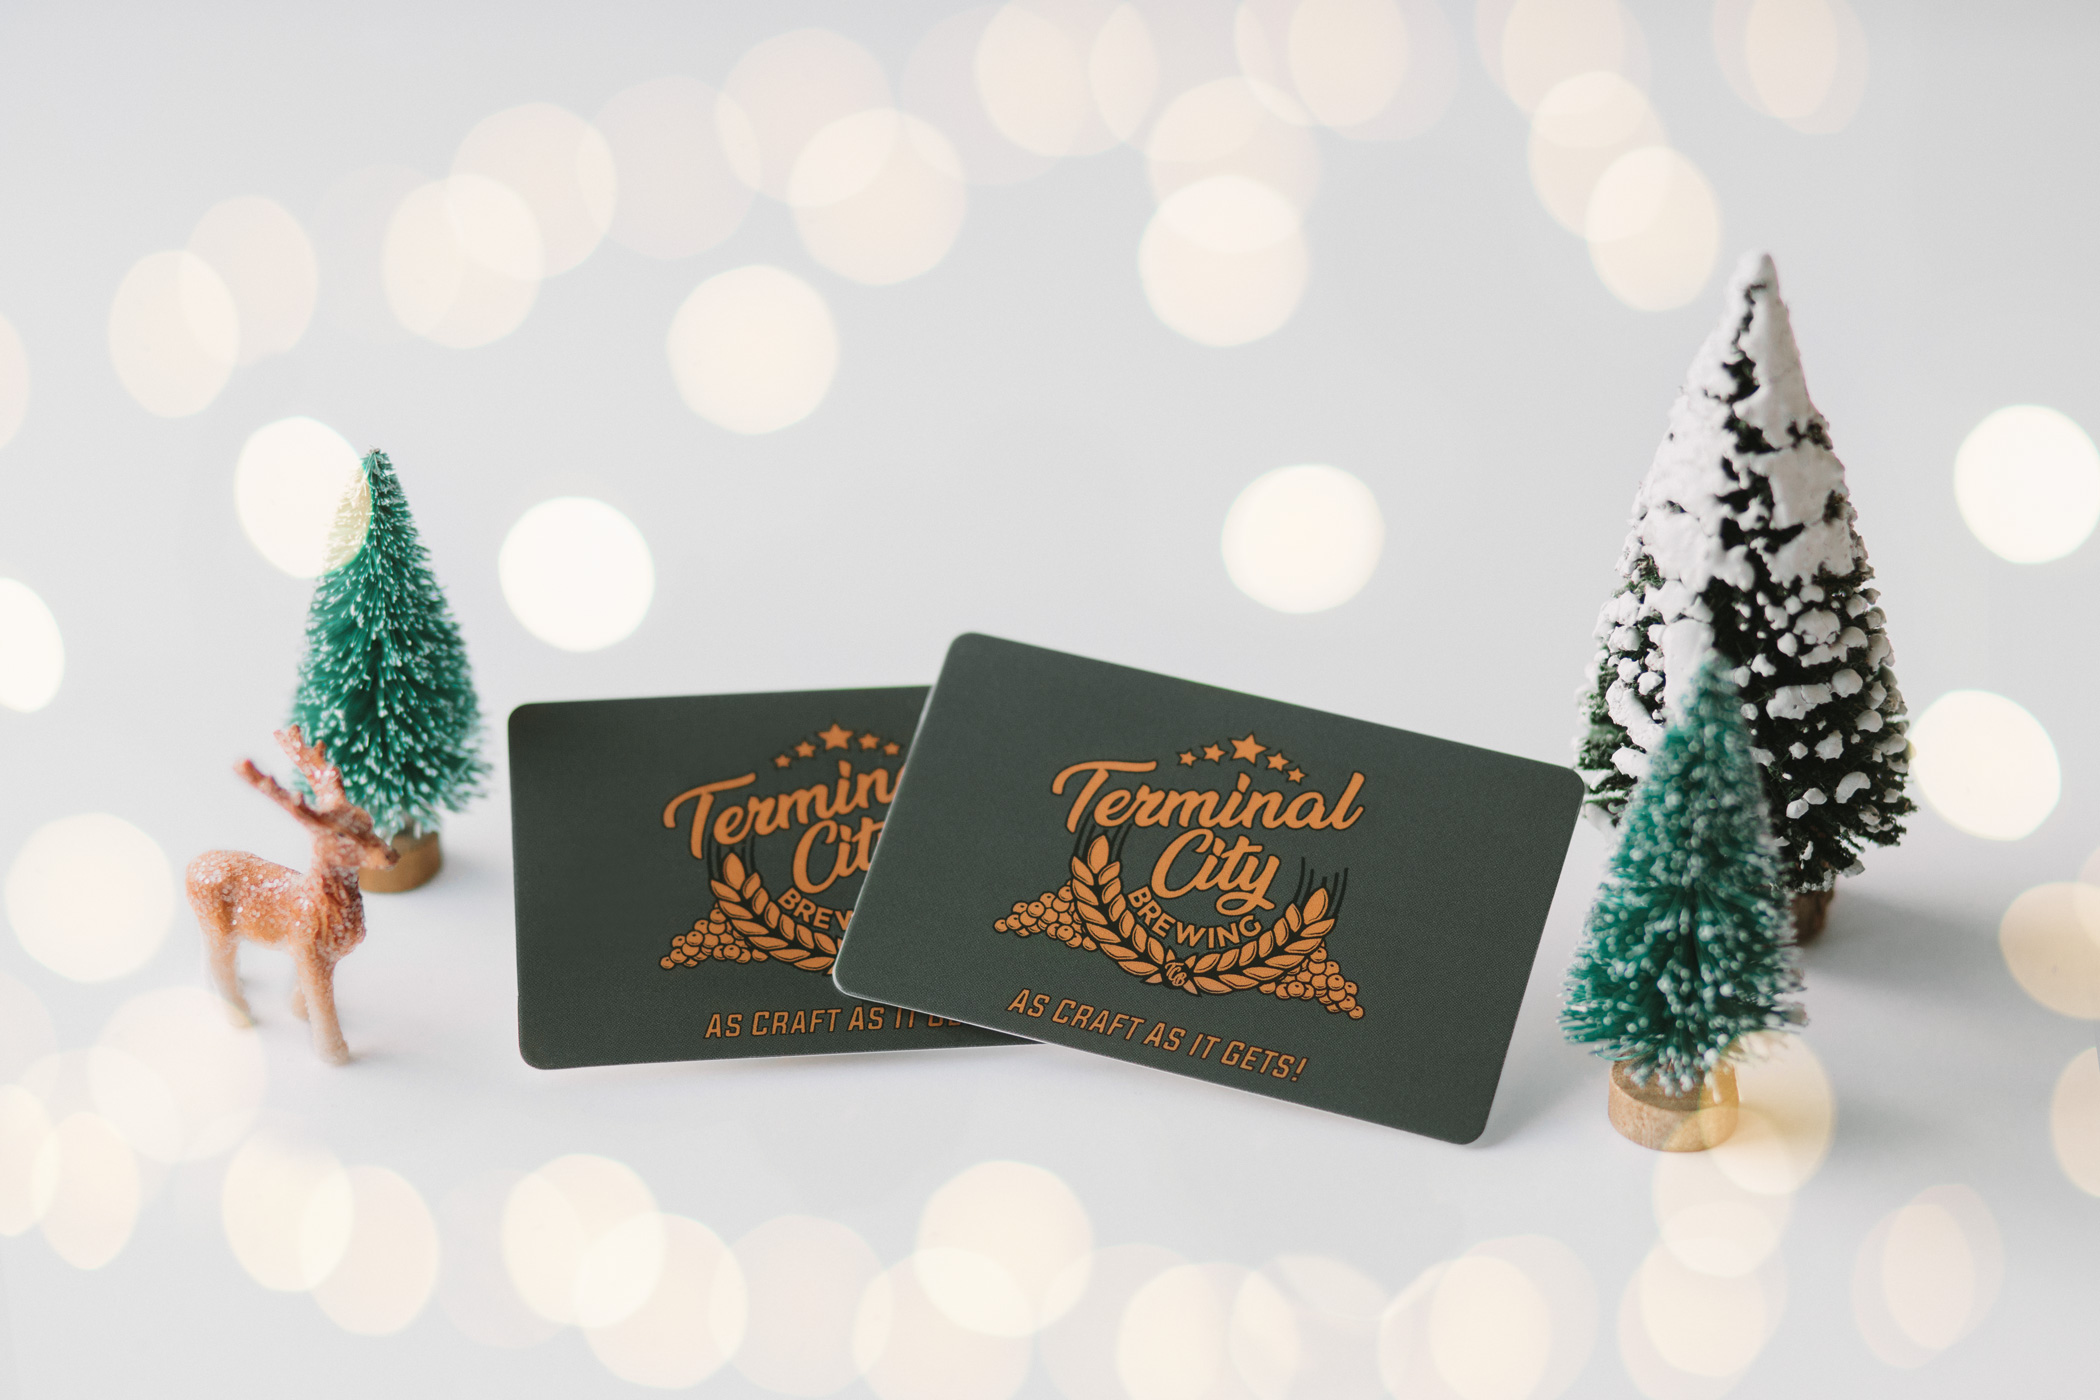 Gift Cards Available at Terminal City Brewing